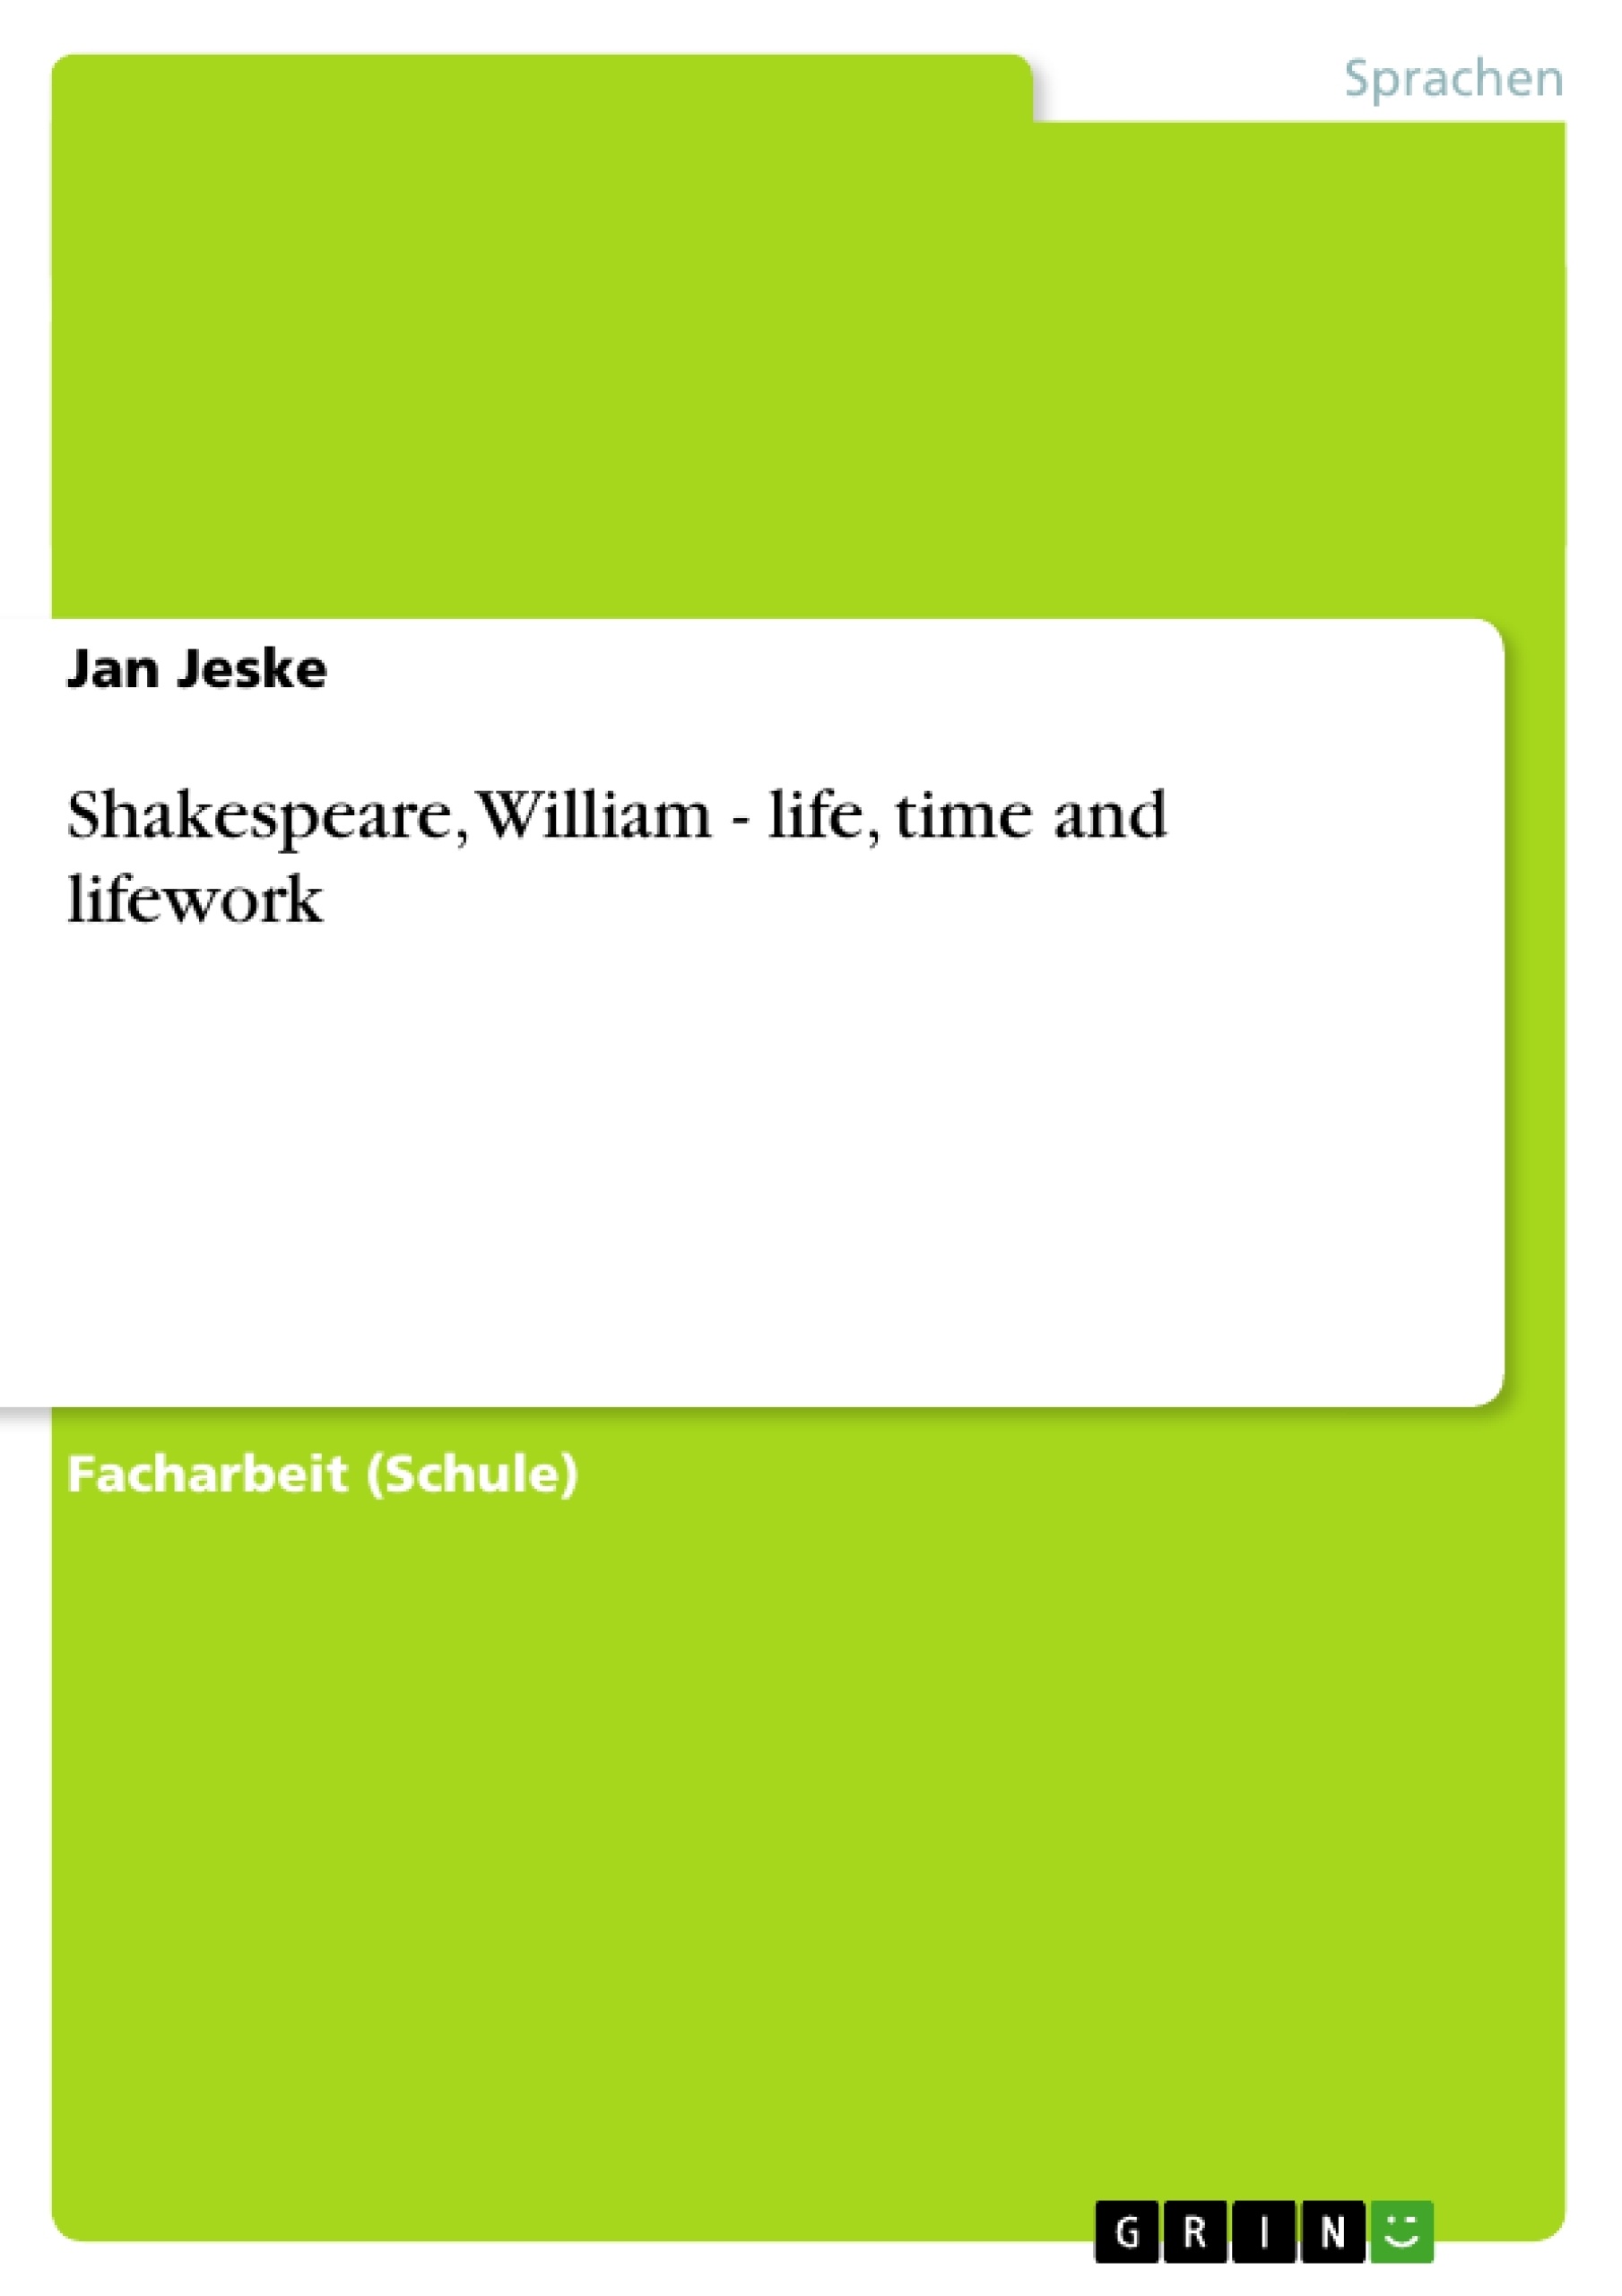 Title: Shakespeare, William - life, time and lifework